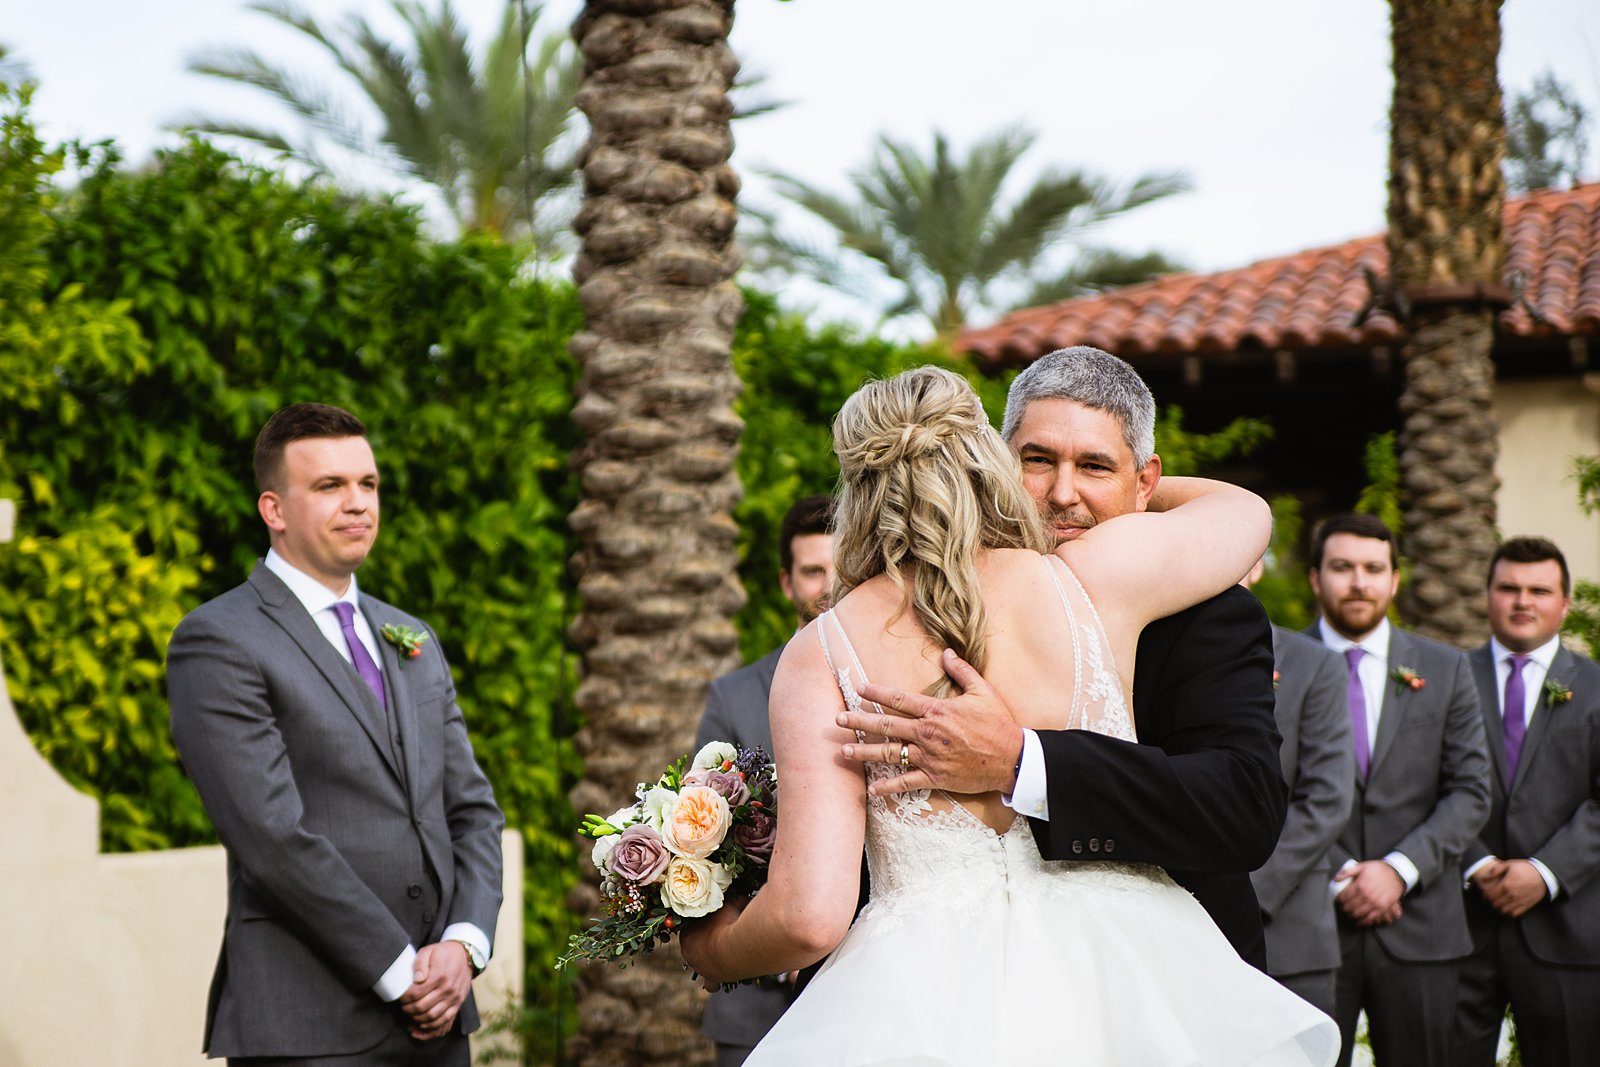 Bride hugging her father during her wedding ceremony at The Scottsdale Resort by PMA Photography.